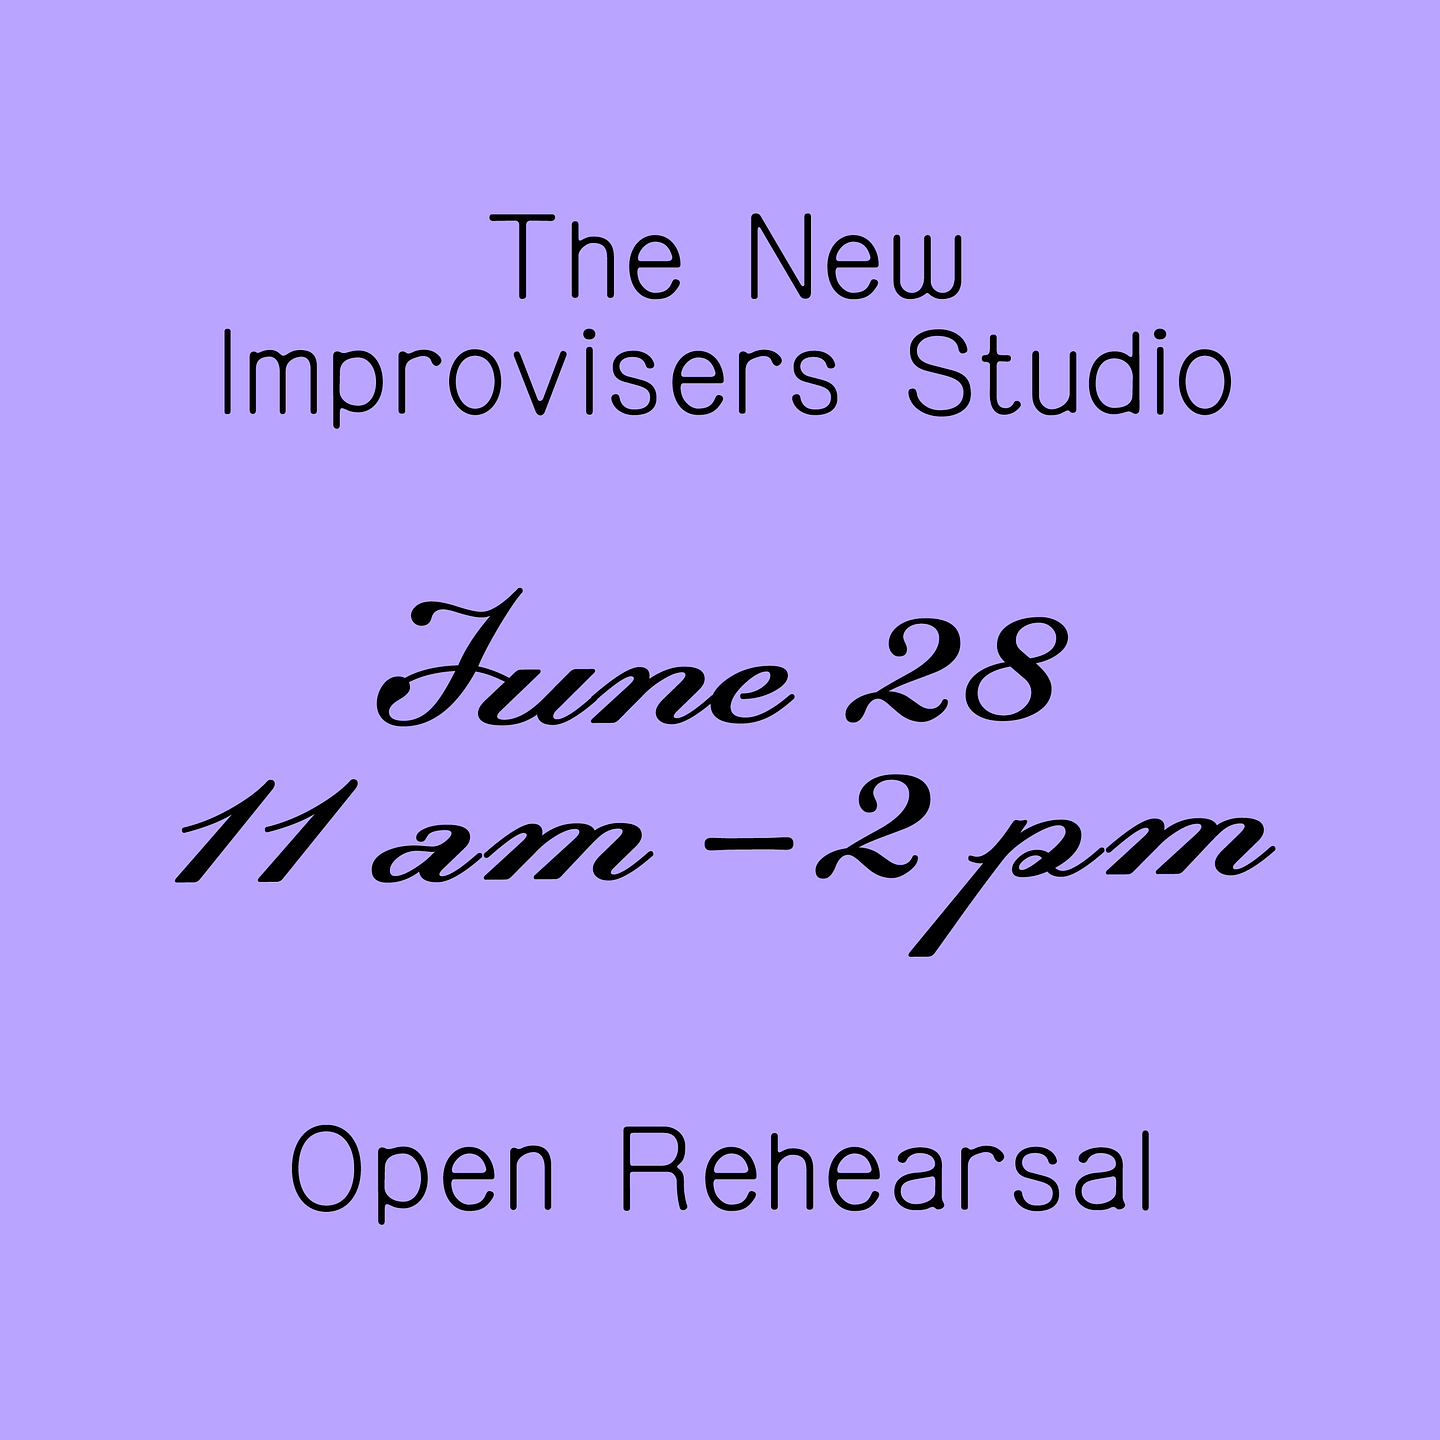 A graphic that reads "The New Improvisers Studio. June 28 11 am - 2 pm. Open Rehearsal." in a black script font on a lilac background.